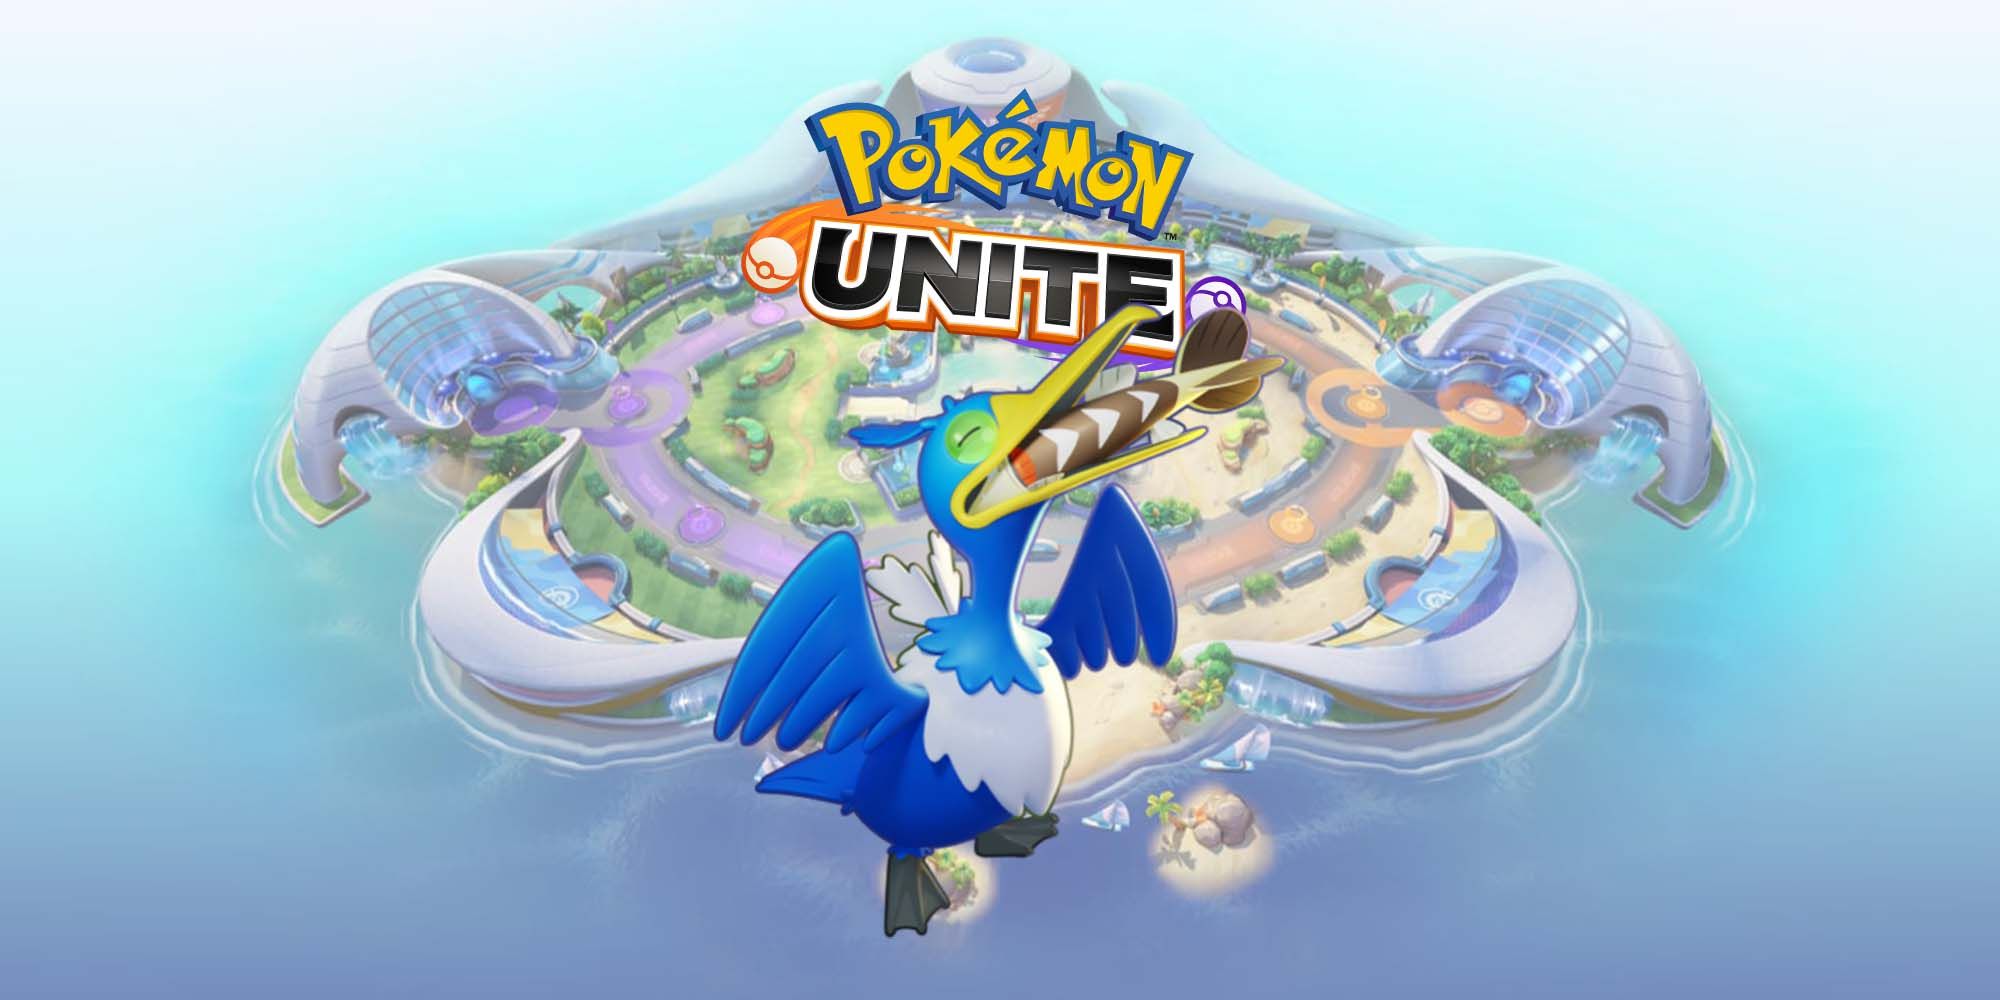 Cramorant from Pokemon Unite in front of an image of the island and game logo